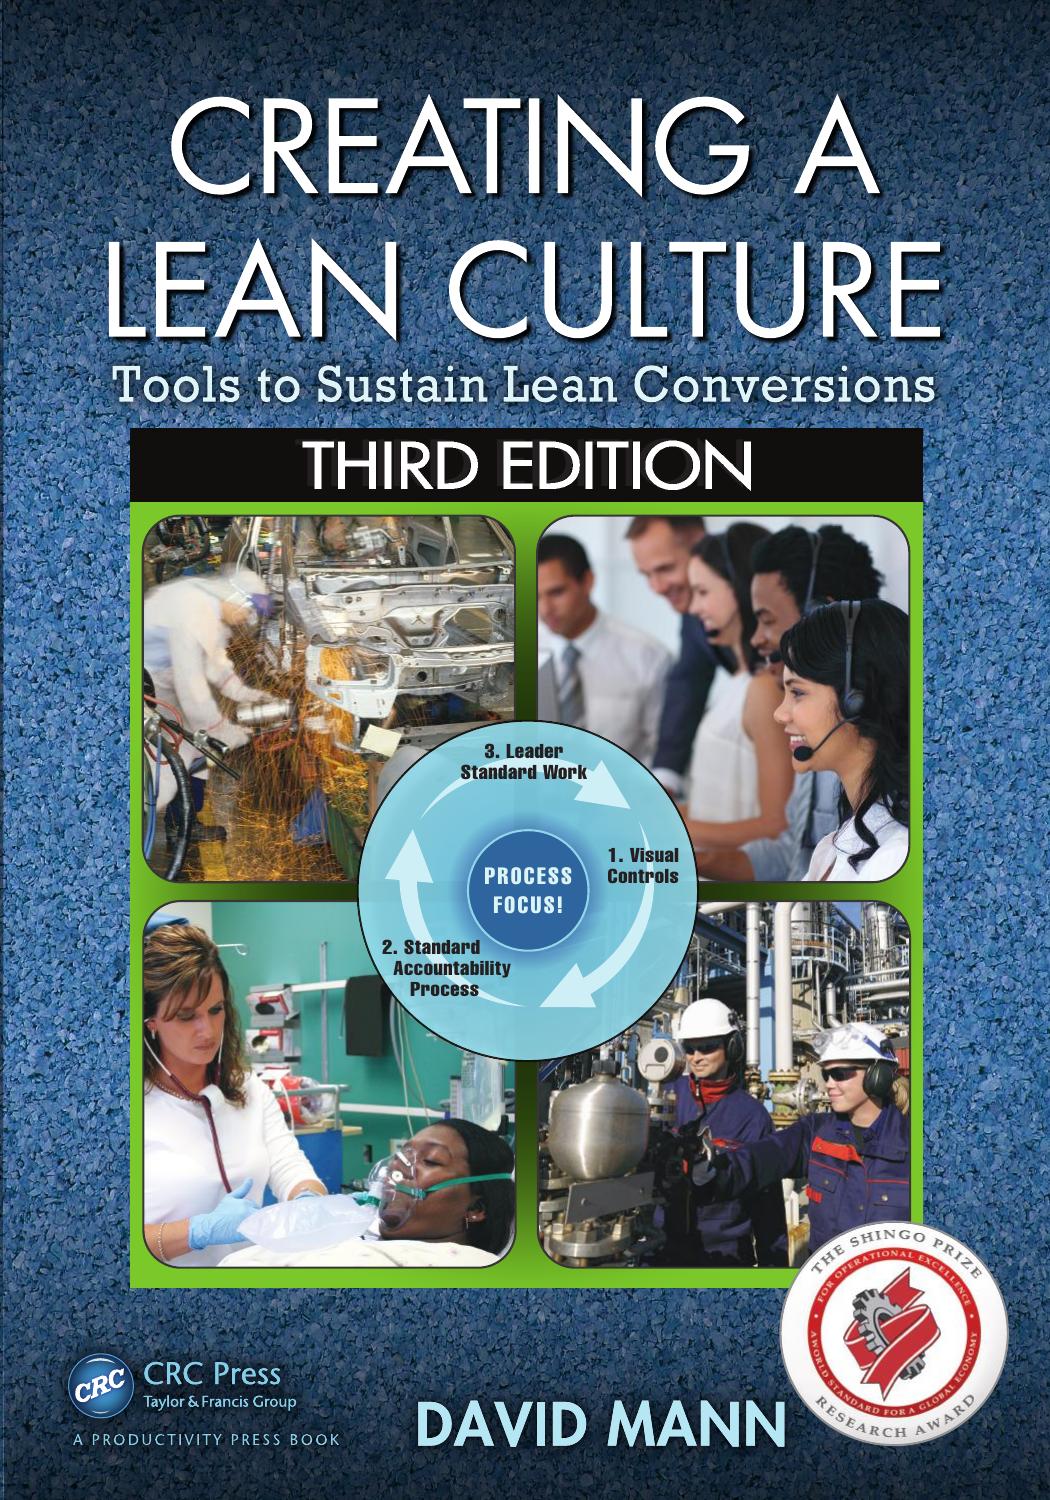 (eBook PDF)Creating a Lean Culture: Tools to Sustain Lean Conversions, Third Edition by David Mann